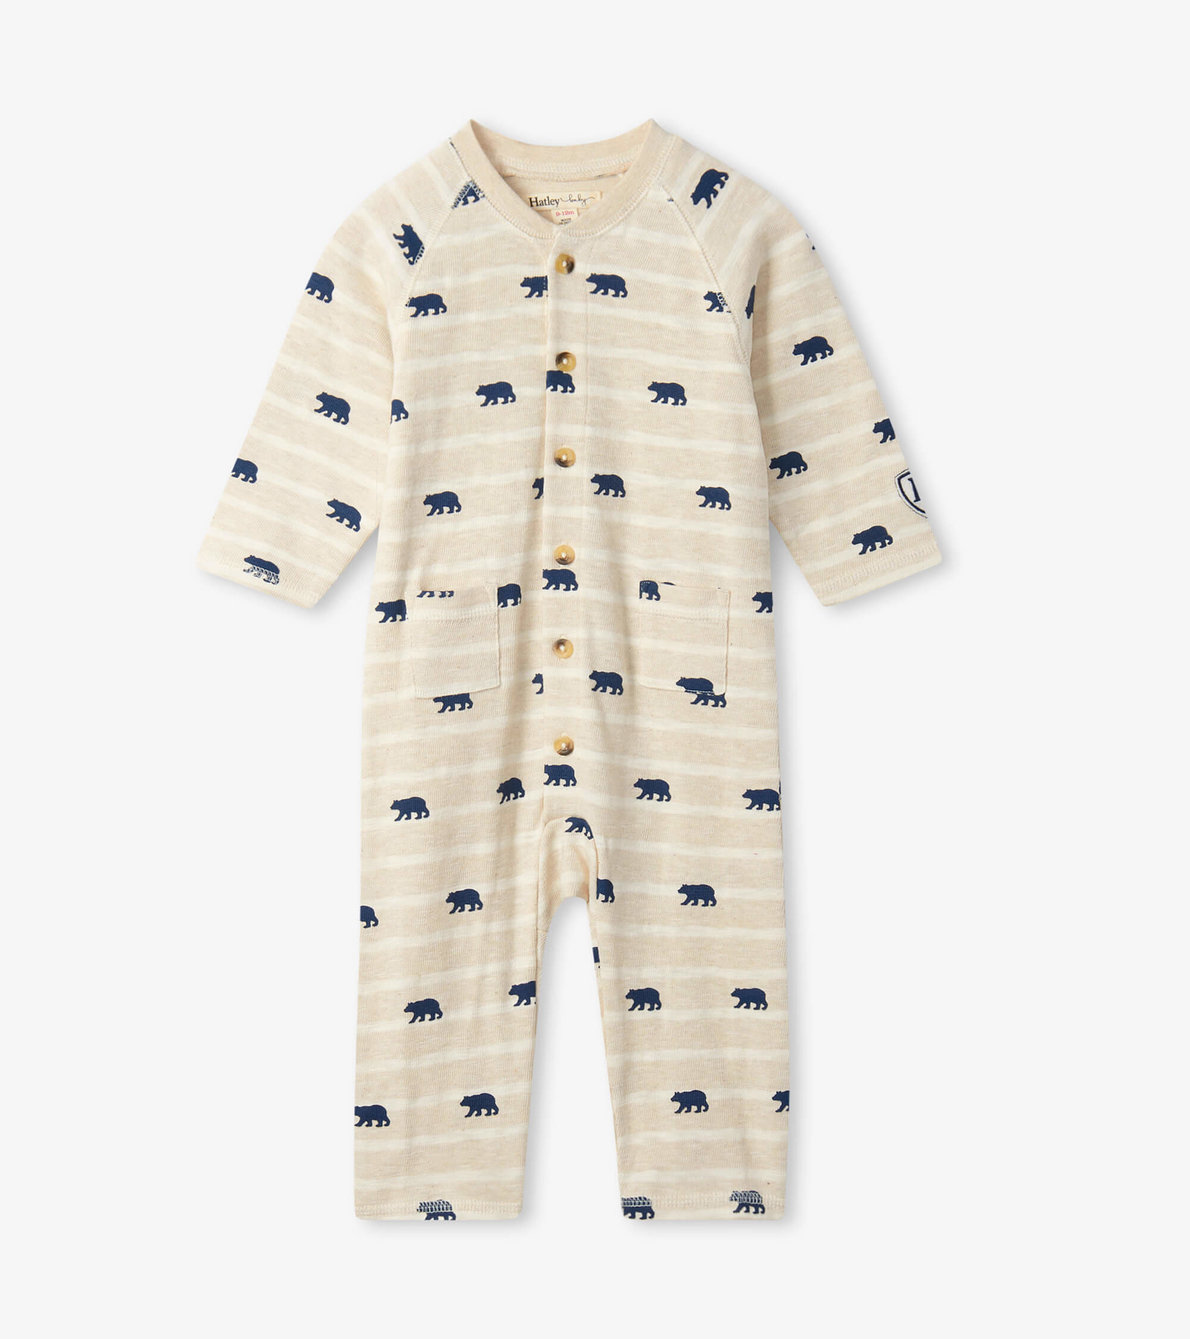 View larger image of Mini Bears Baby Romper